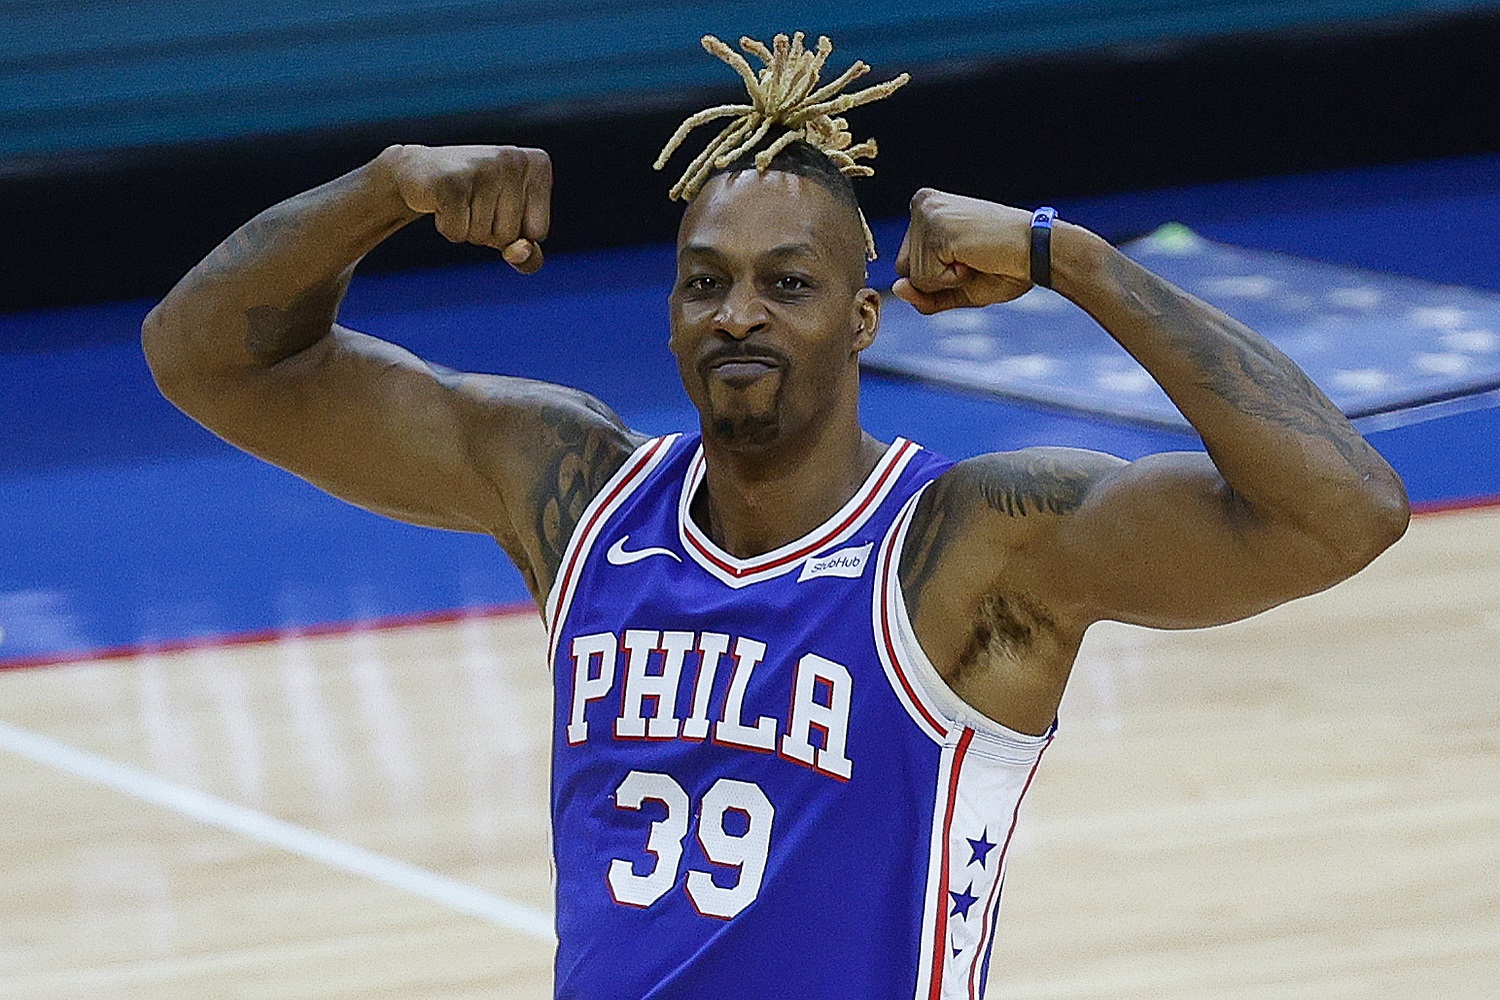 Dwight Howard celebrates during the fourth quarter against the Atlanta Hawks during Game 2 of the Philadelphia 76ers' playoff series.